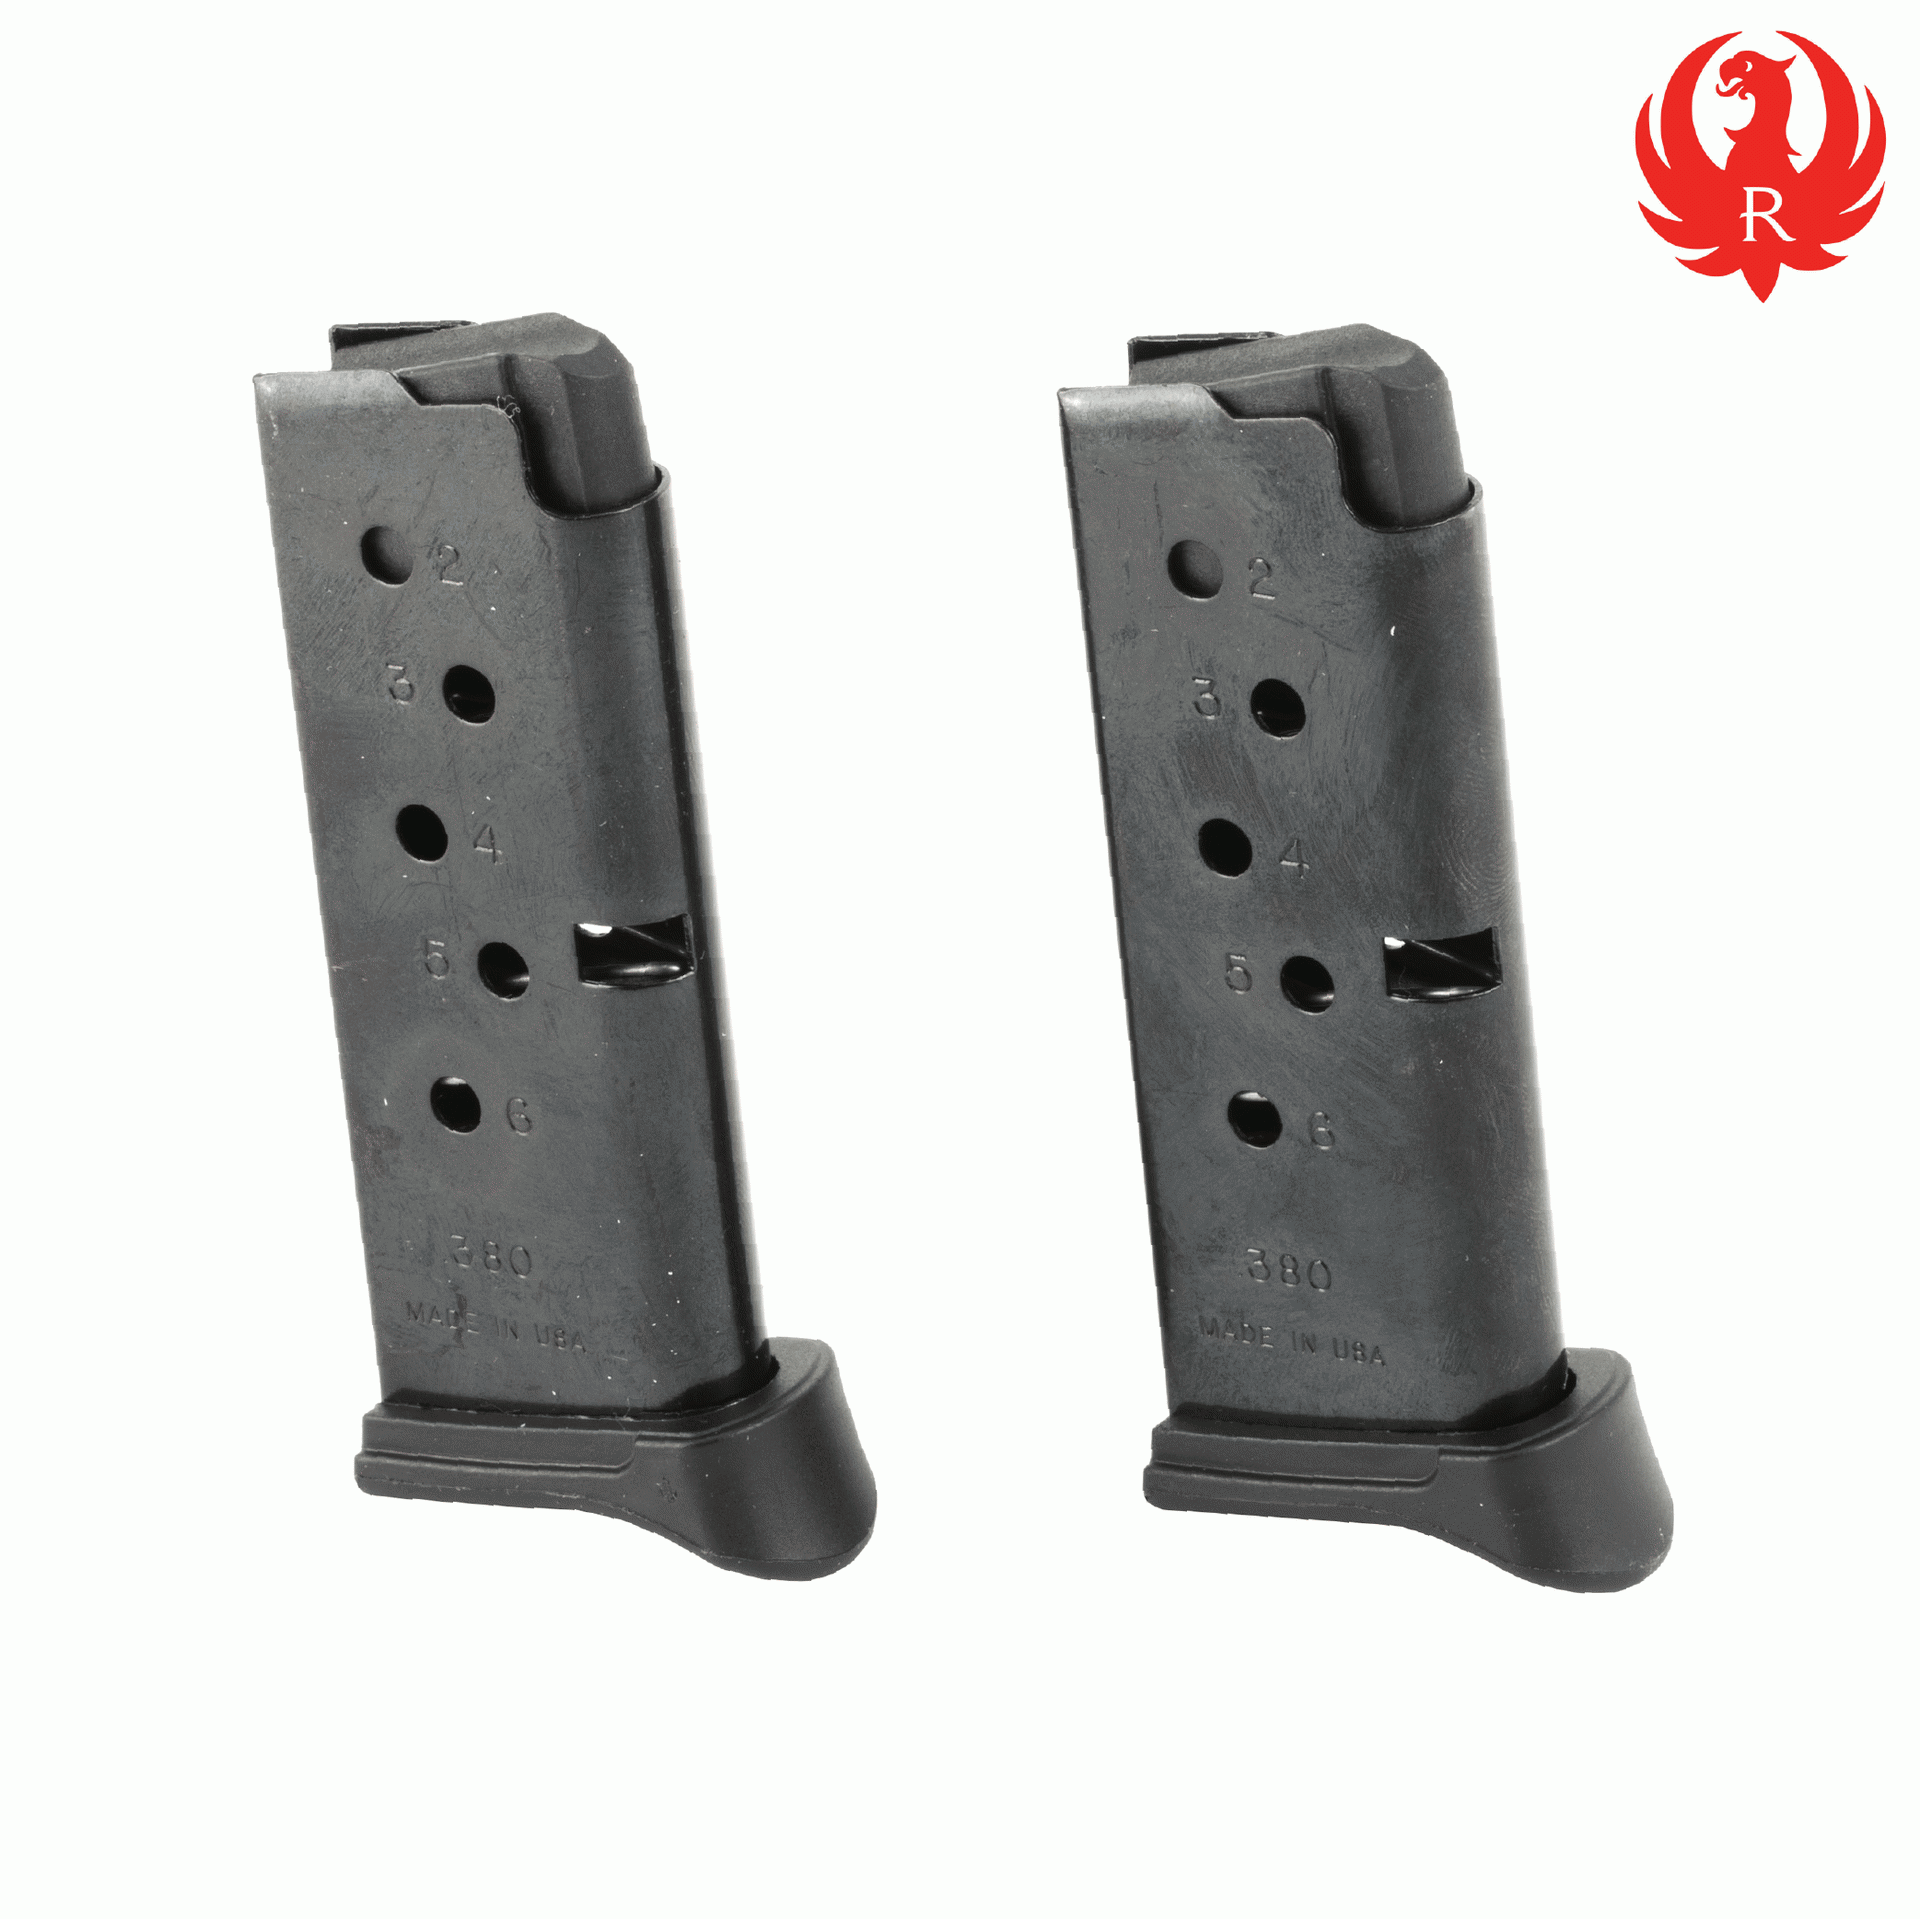 Details about   Ruger LCP Pistol 380 6 RD Round Magazine 90333 Genuine Factory In Package NEW 